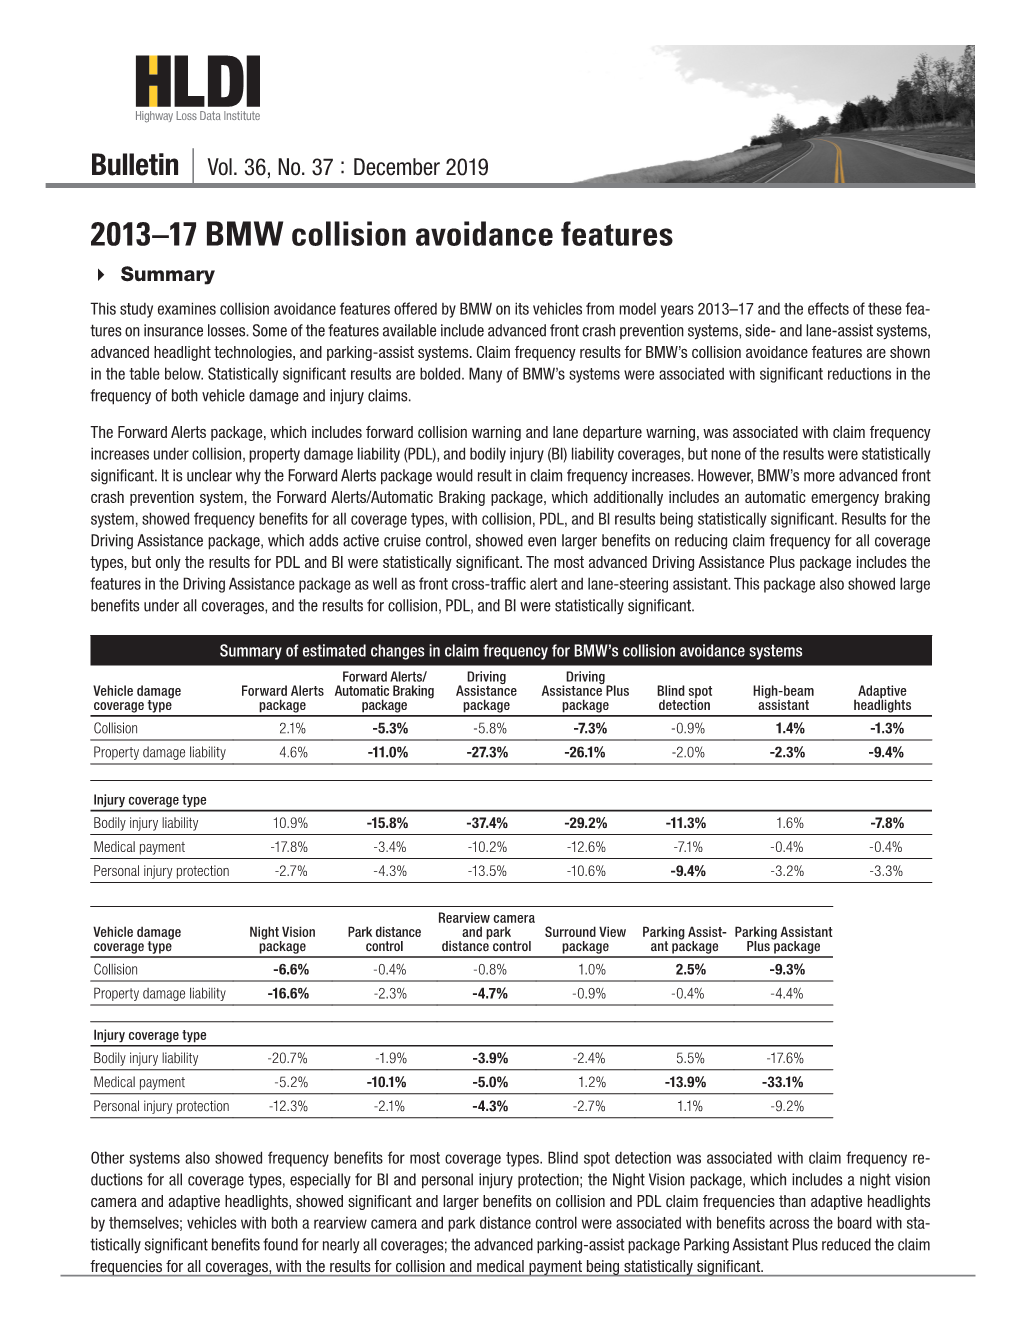 2013–17 BMW Collision Avoidance Features